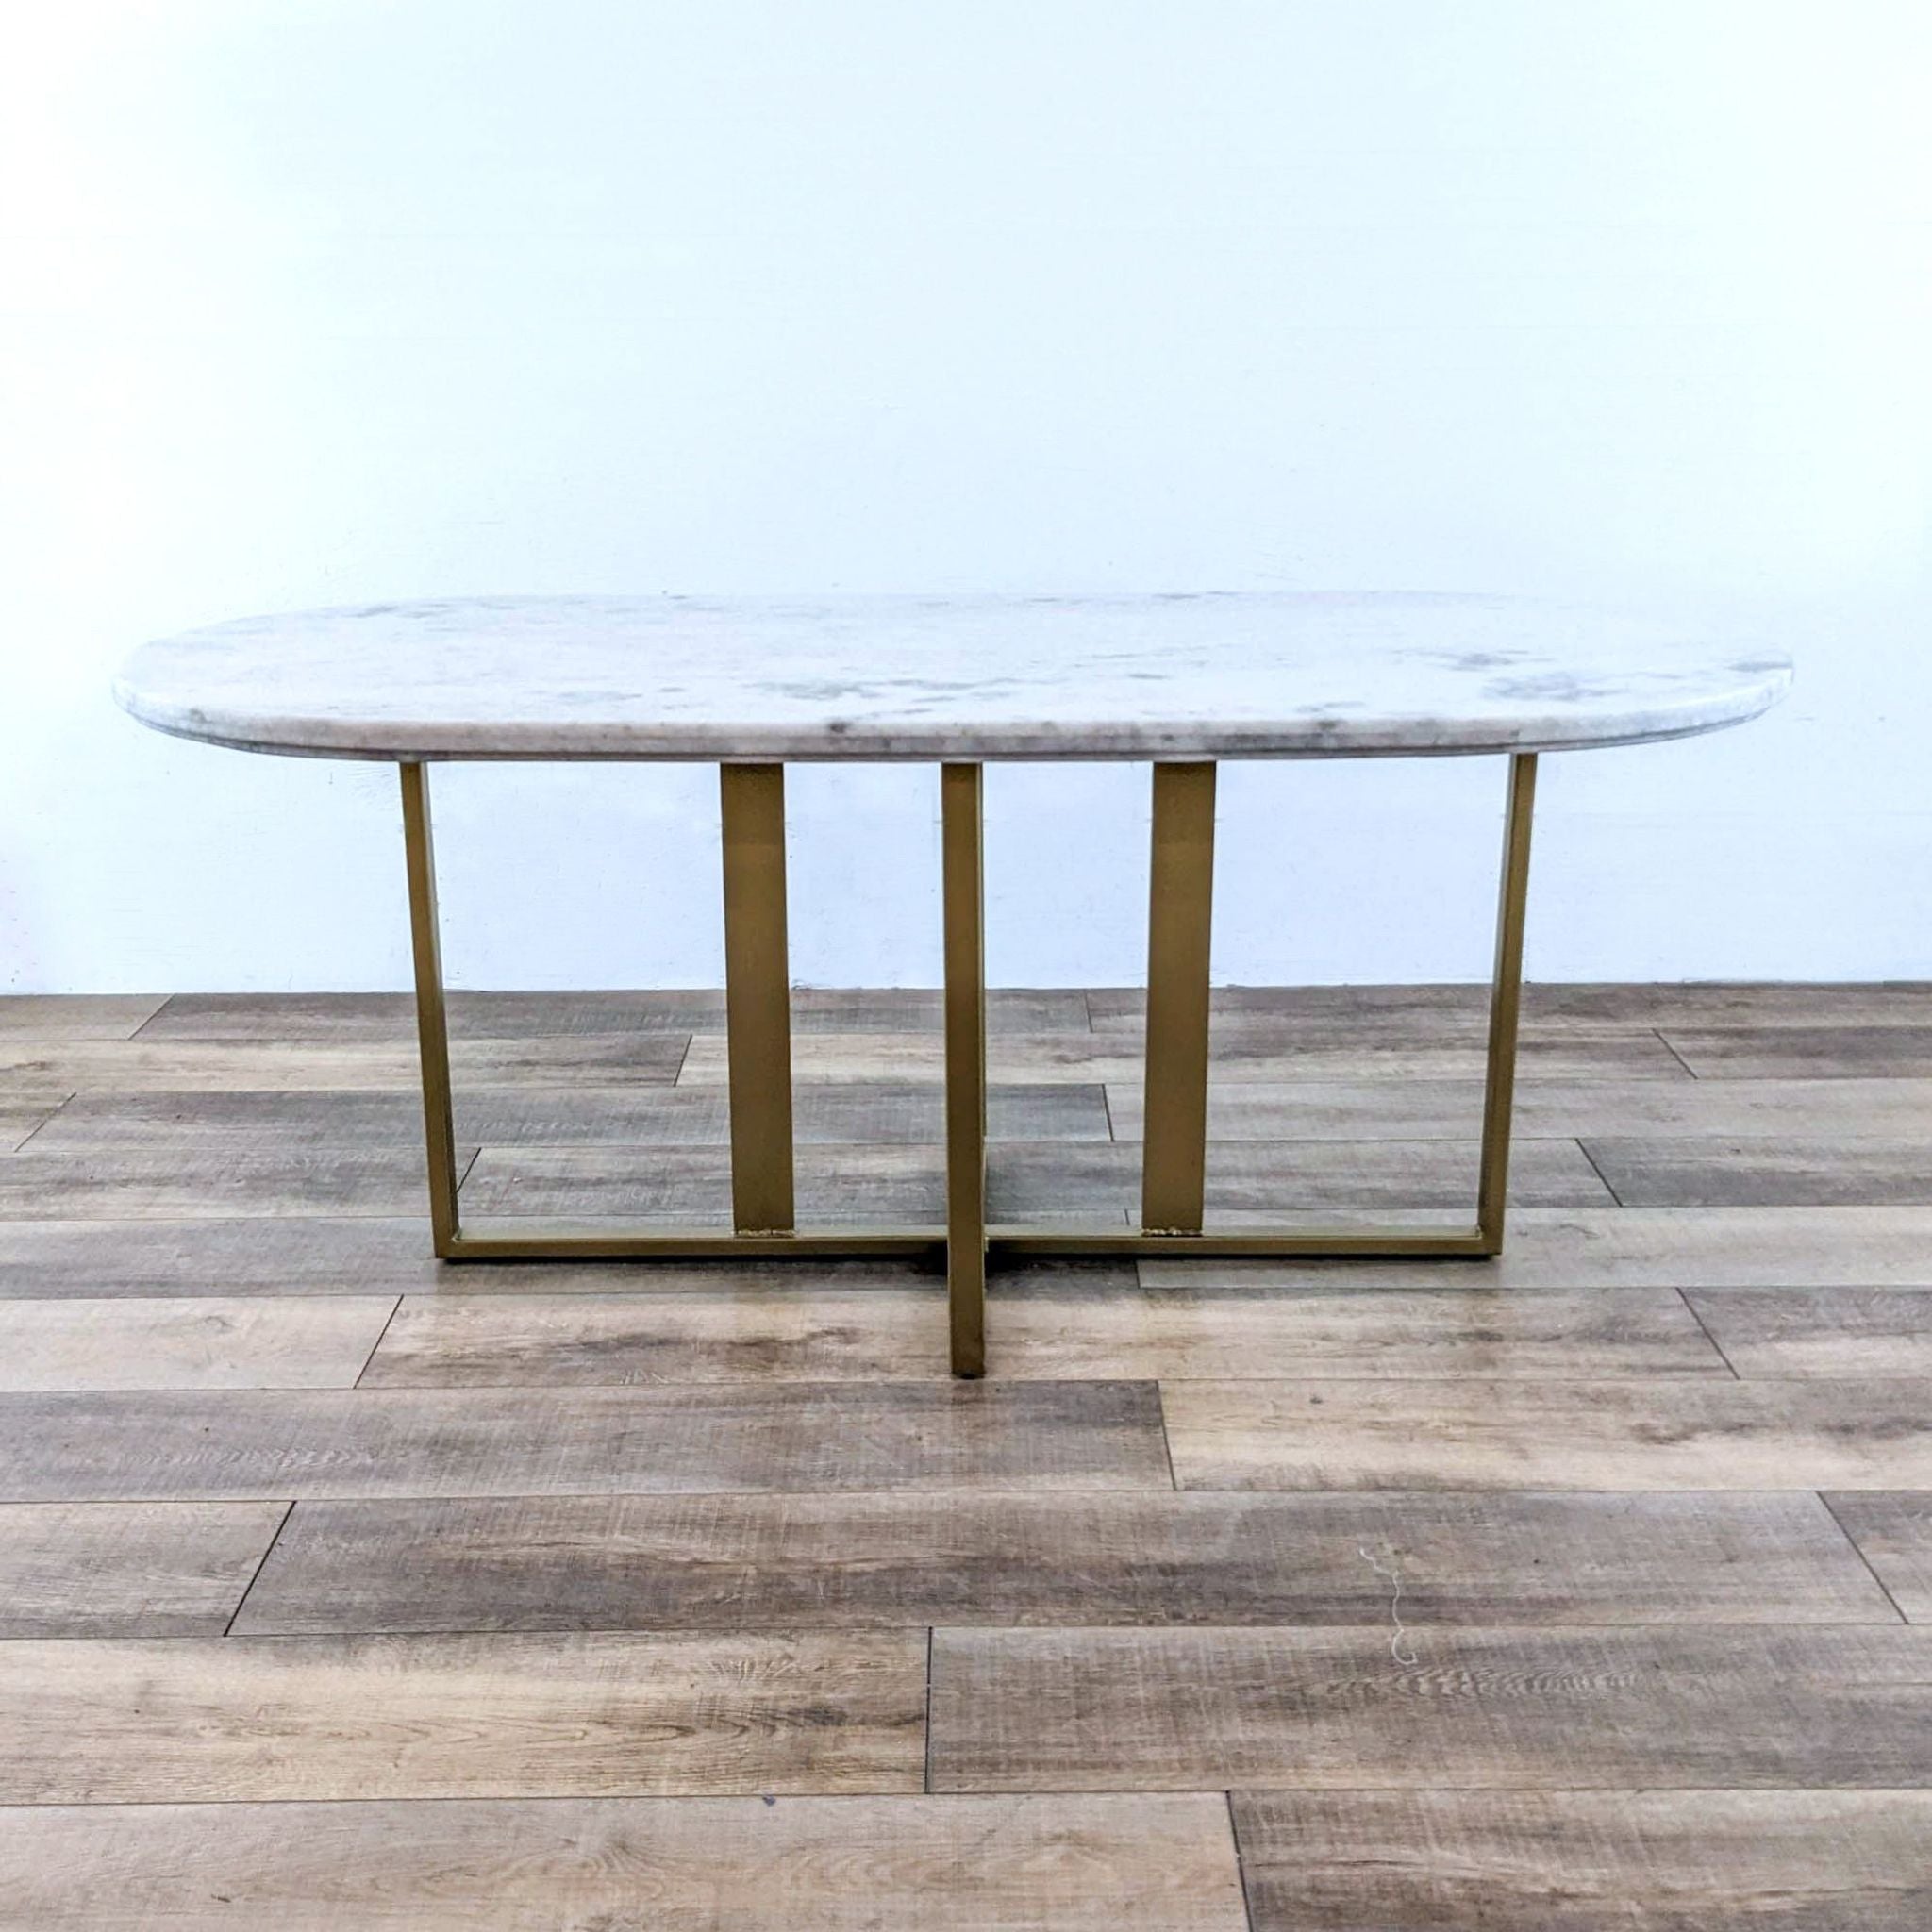 Alt text 1: The Dylia dining table by Four Hands, featuring a brass-finished iron base and a round white marble top, on a wooden floor.